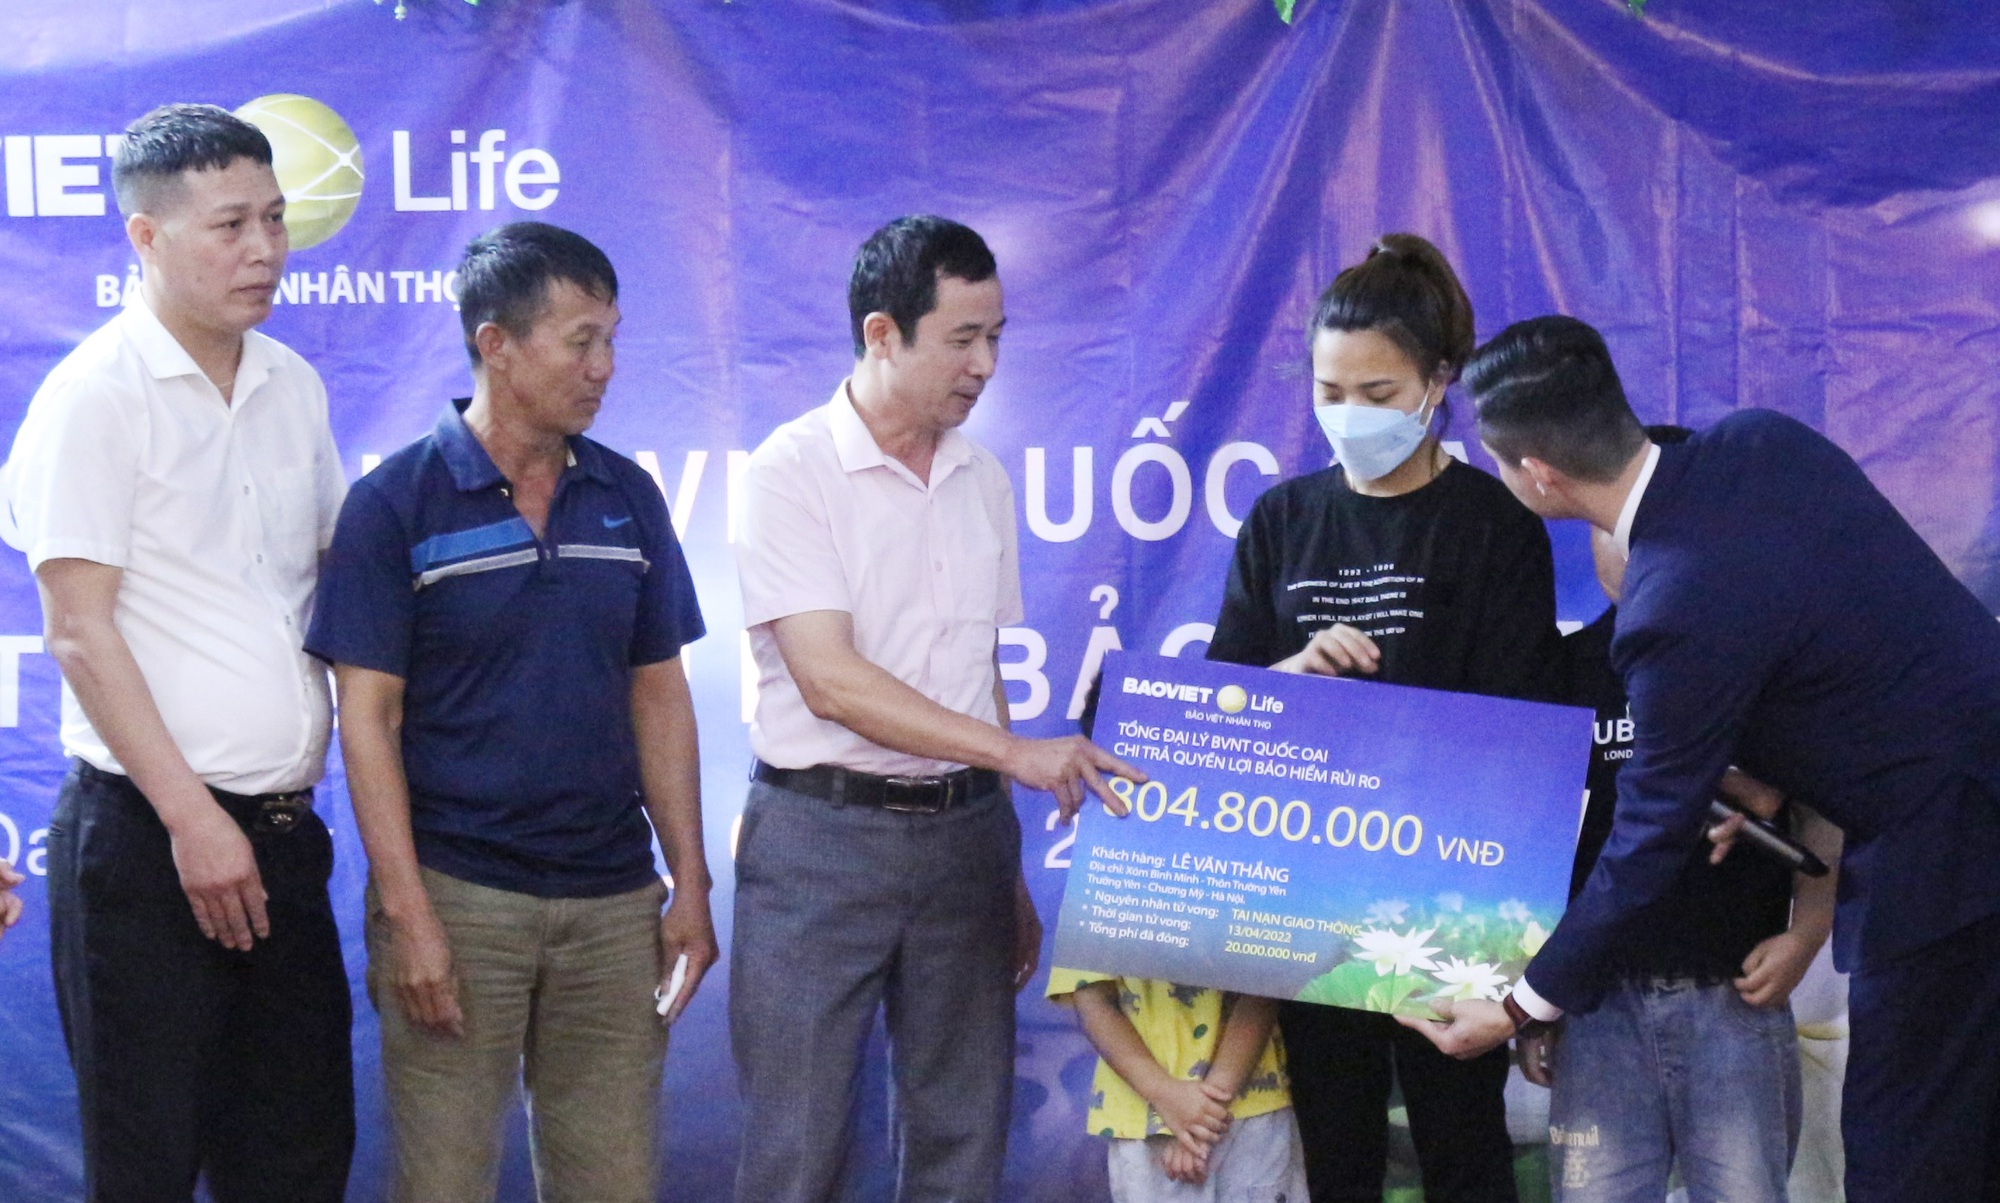 Bao Viet Life paid more than 800 million VND for customers who died in a motorcycle accident - Photo 1.